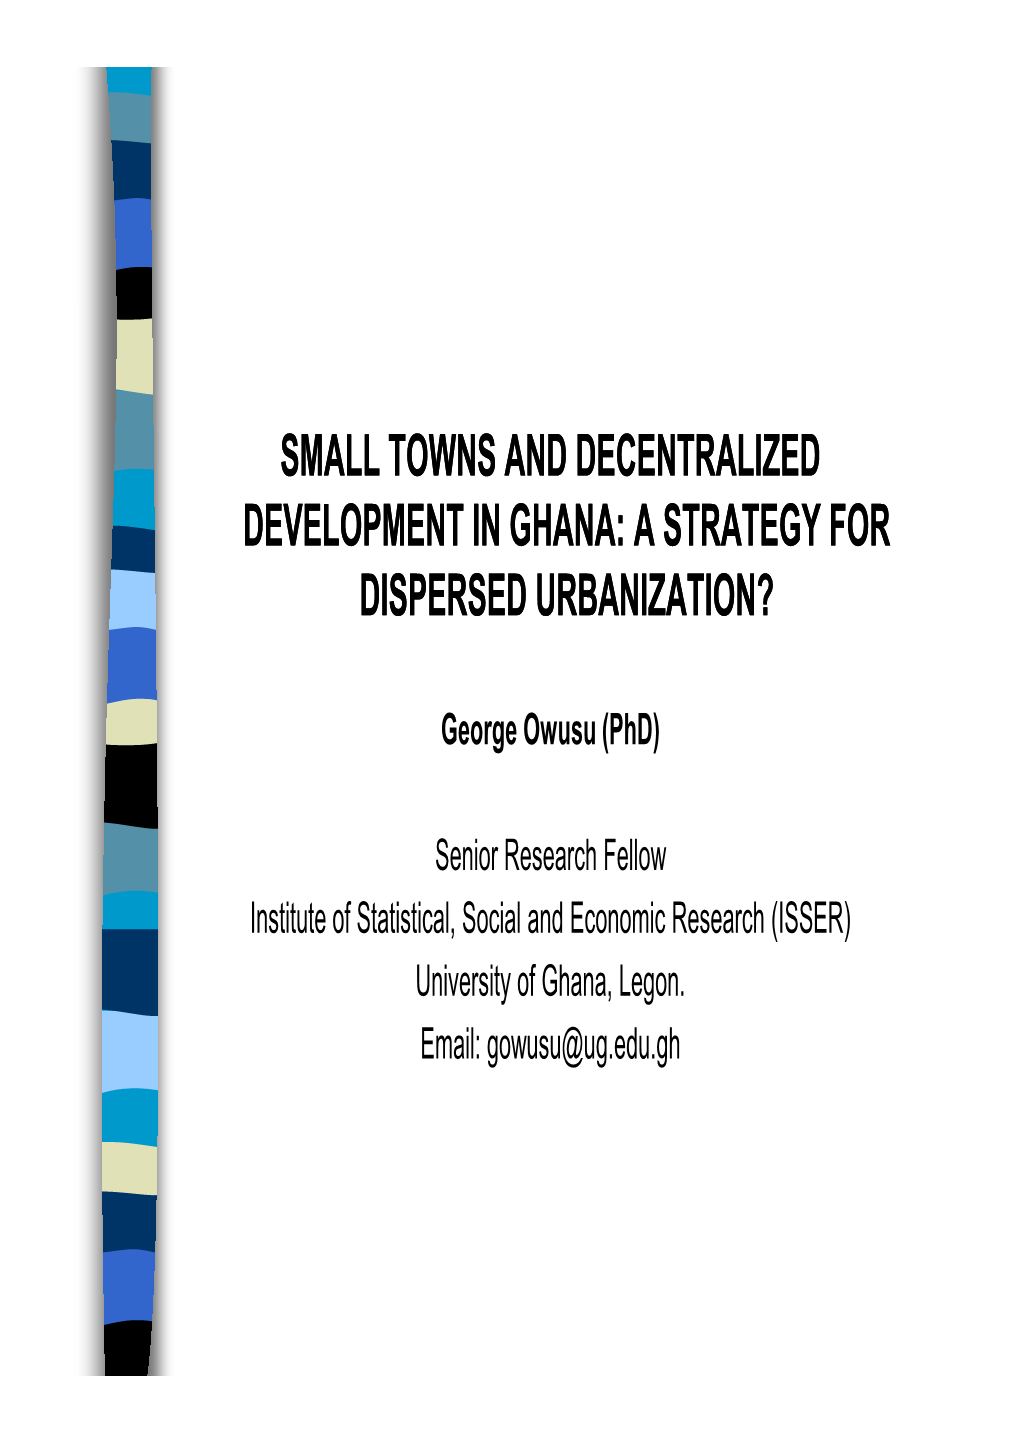 Small Towns and Decentralized Development in Ghana: a Strategy for Dispersed Urbanization?